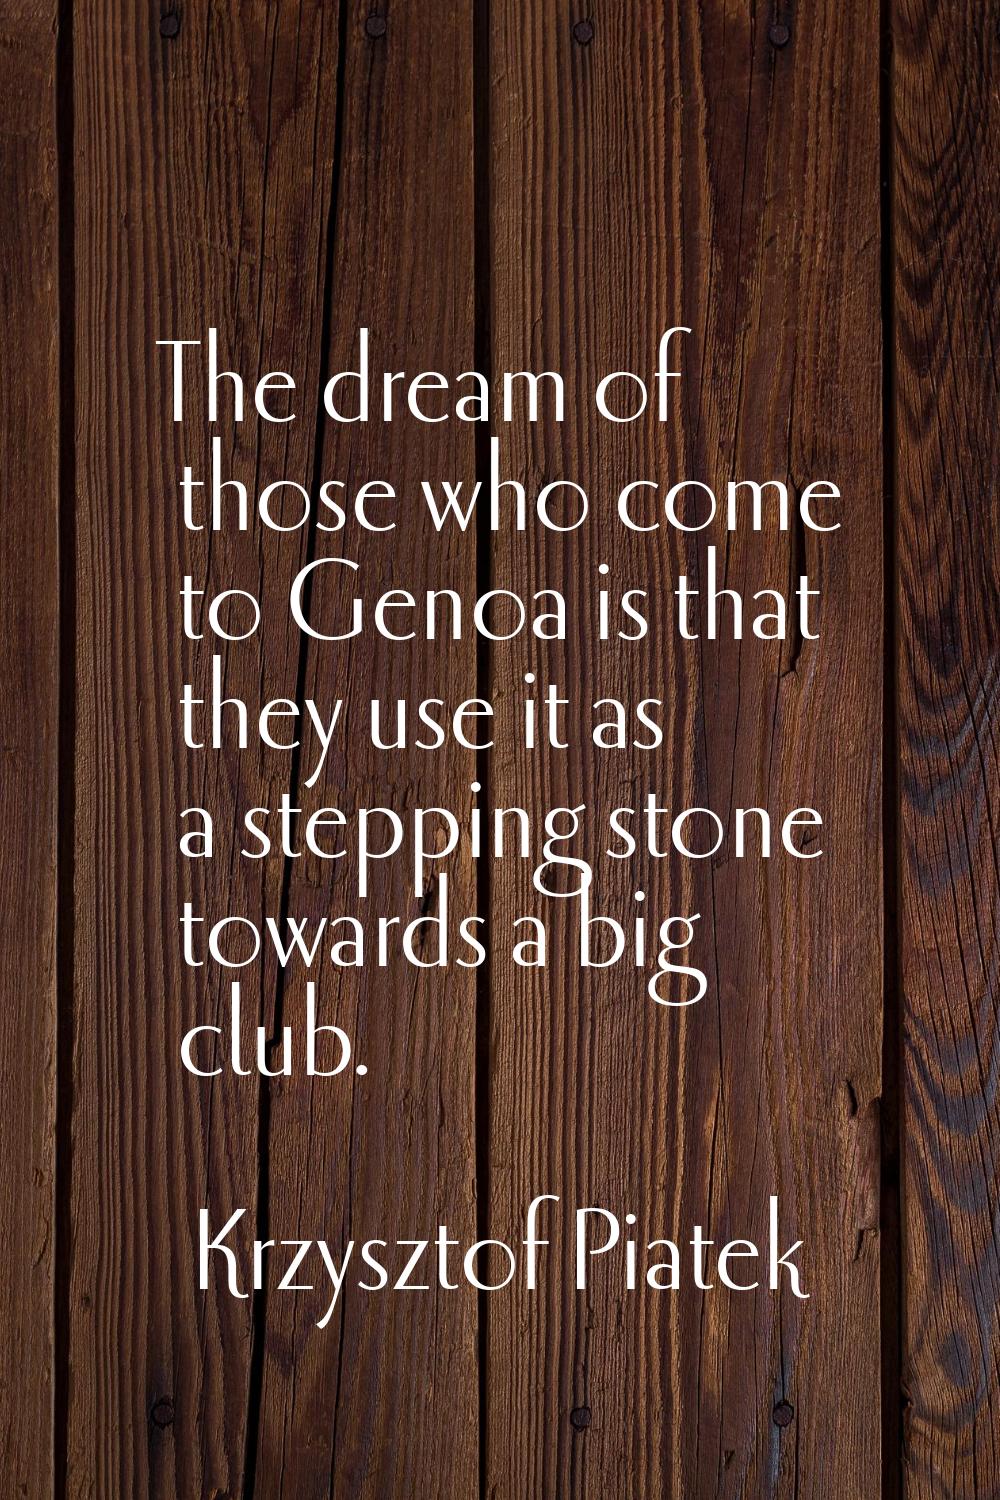 The dream of those who come to Genoa is that they use it as a stepping stone towards a big club.